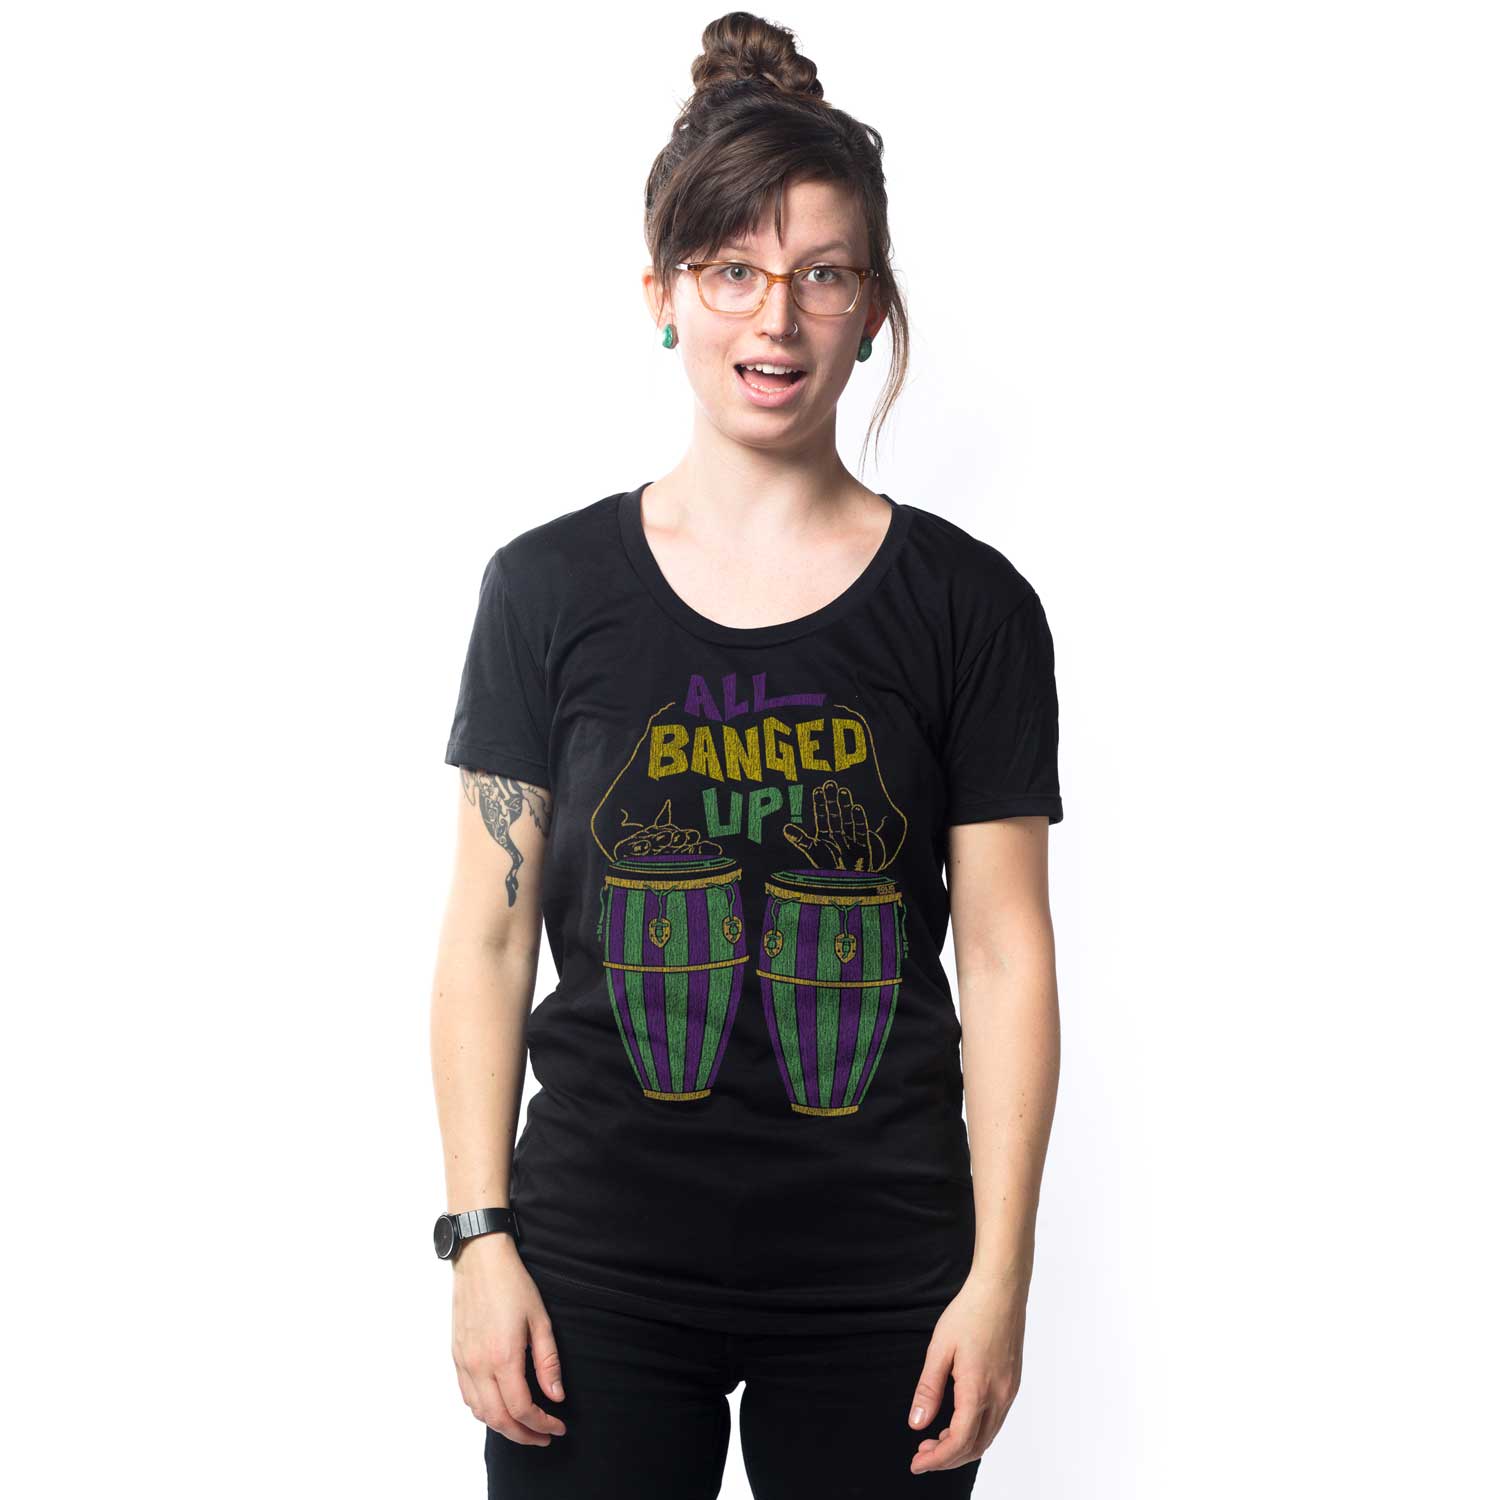 Women's All Banged Up Vintage Graphic T-Shirt | Funny NOLA Music Black Tee on Model | Solid Threads